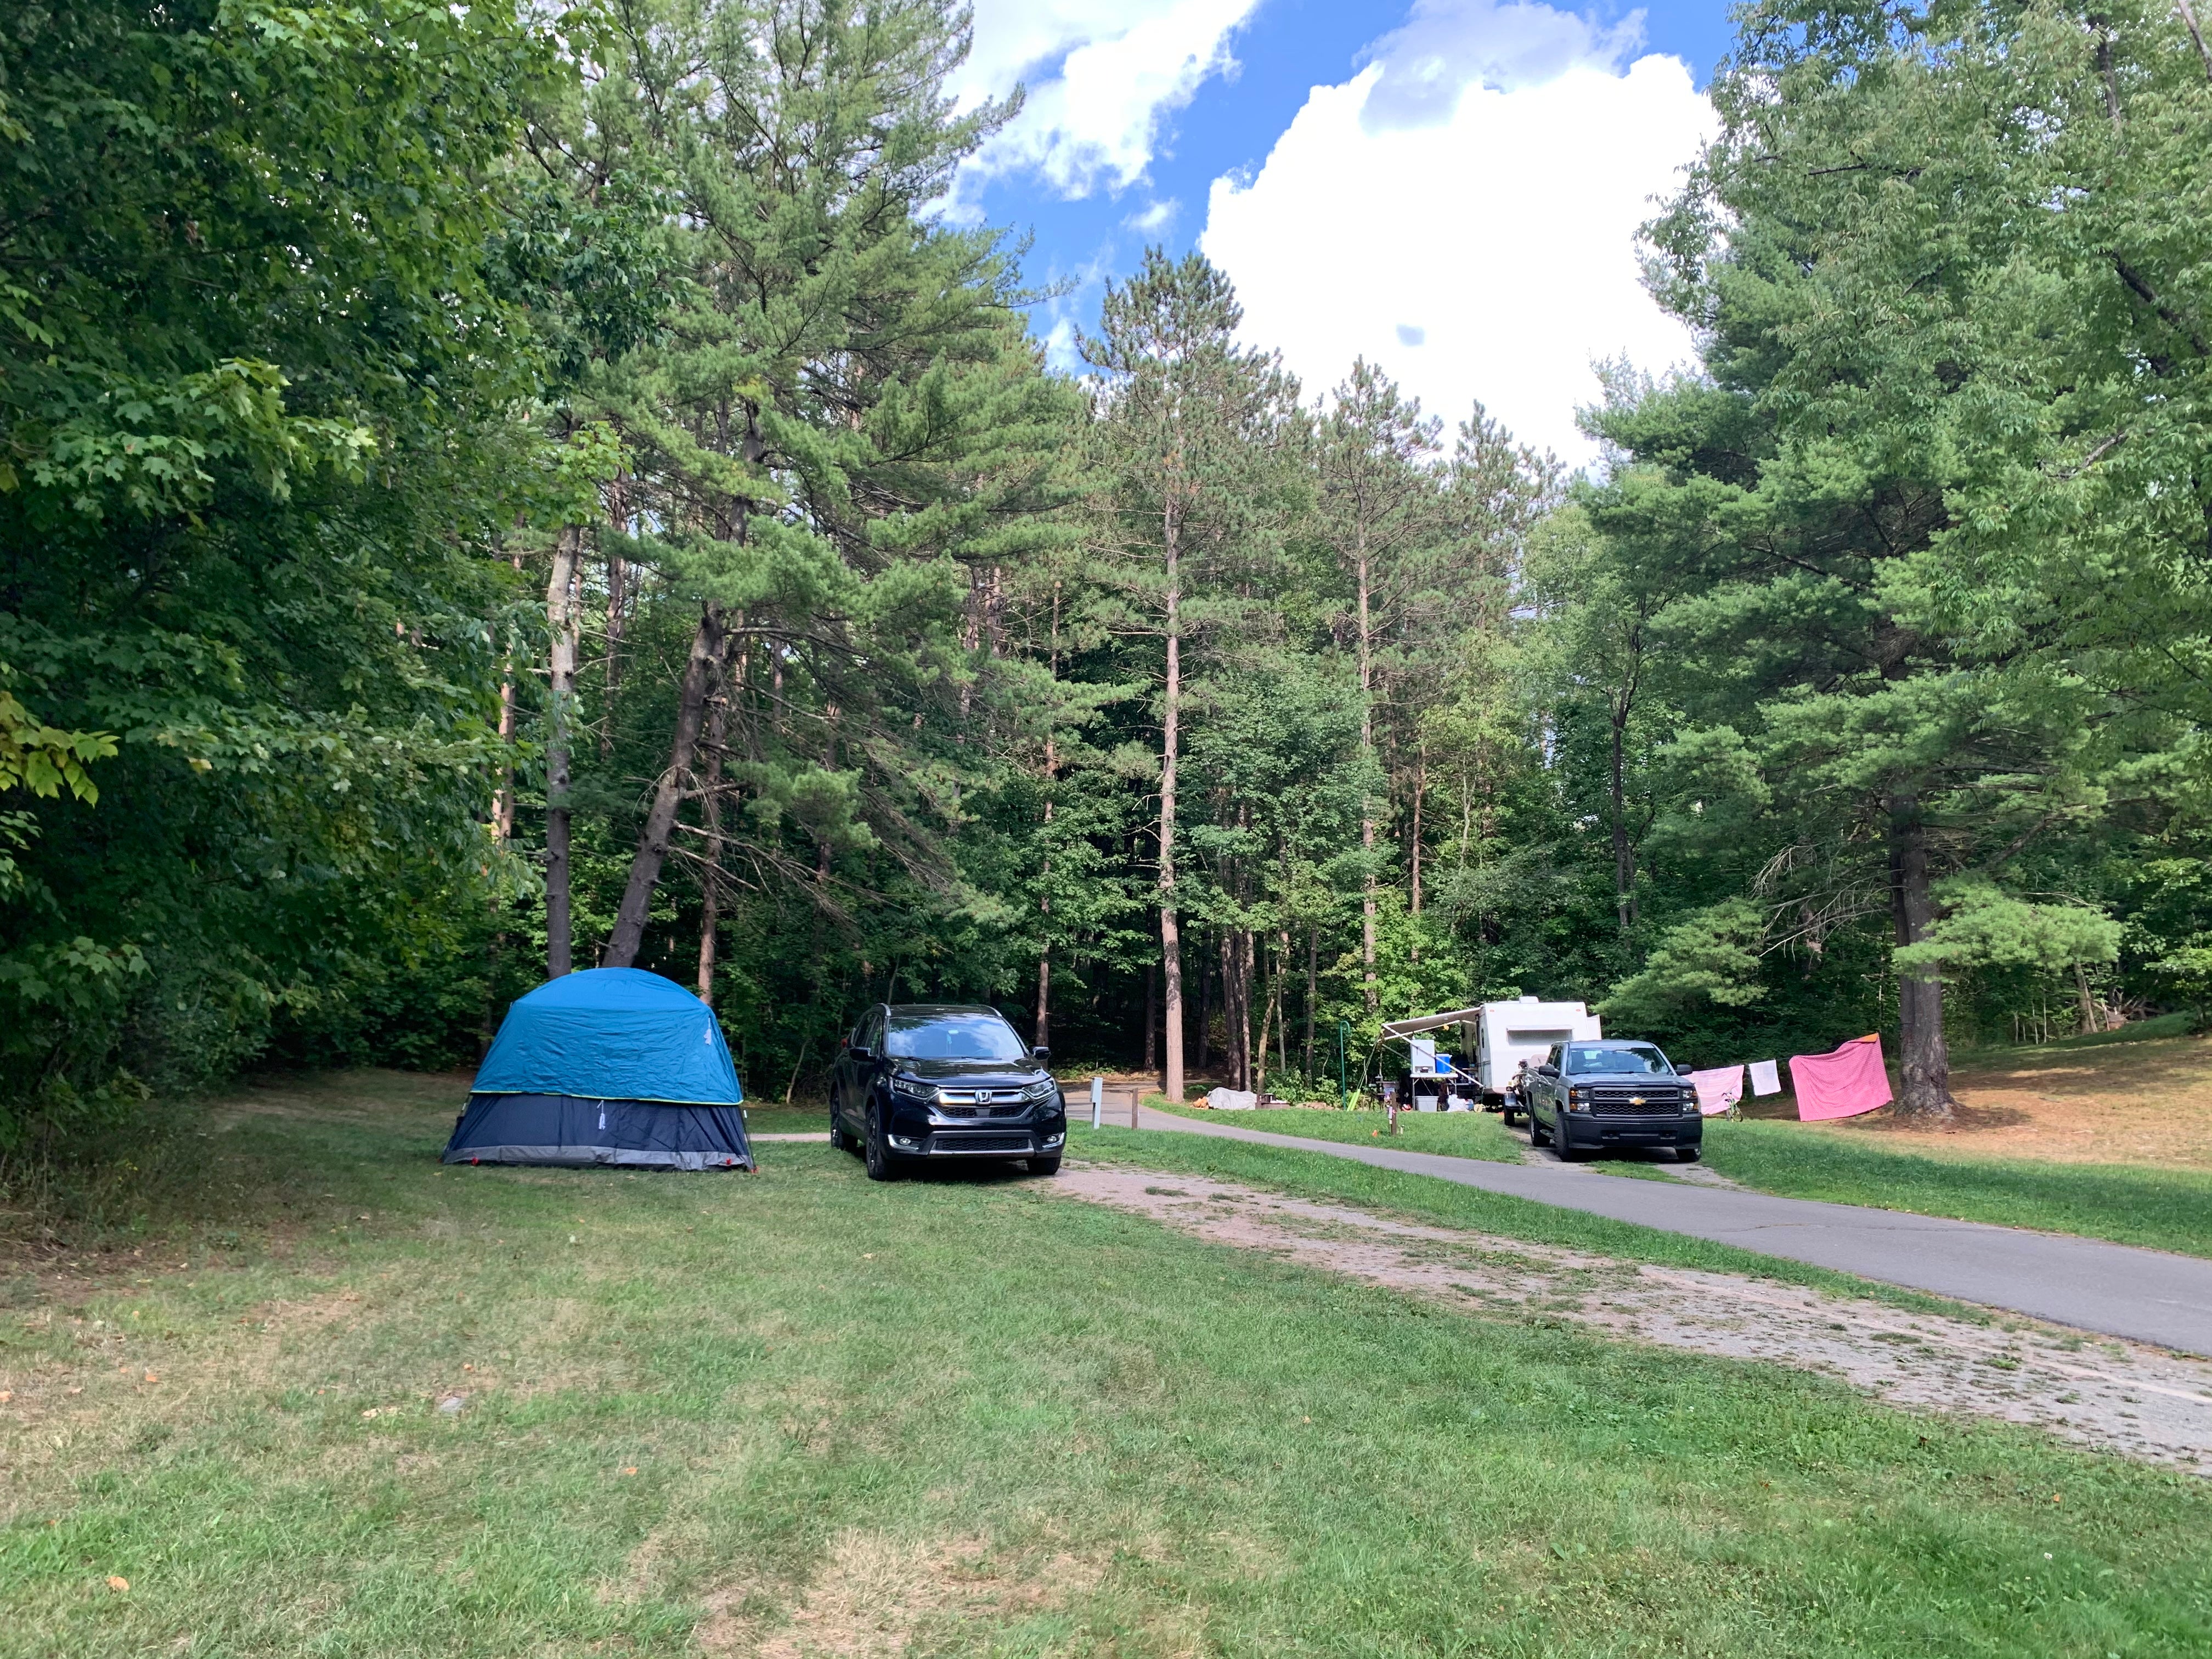 Our campsite is on the left, the next camper is on the right.